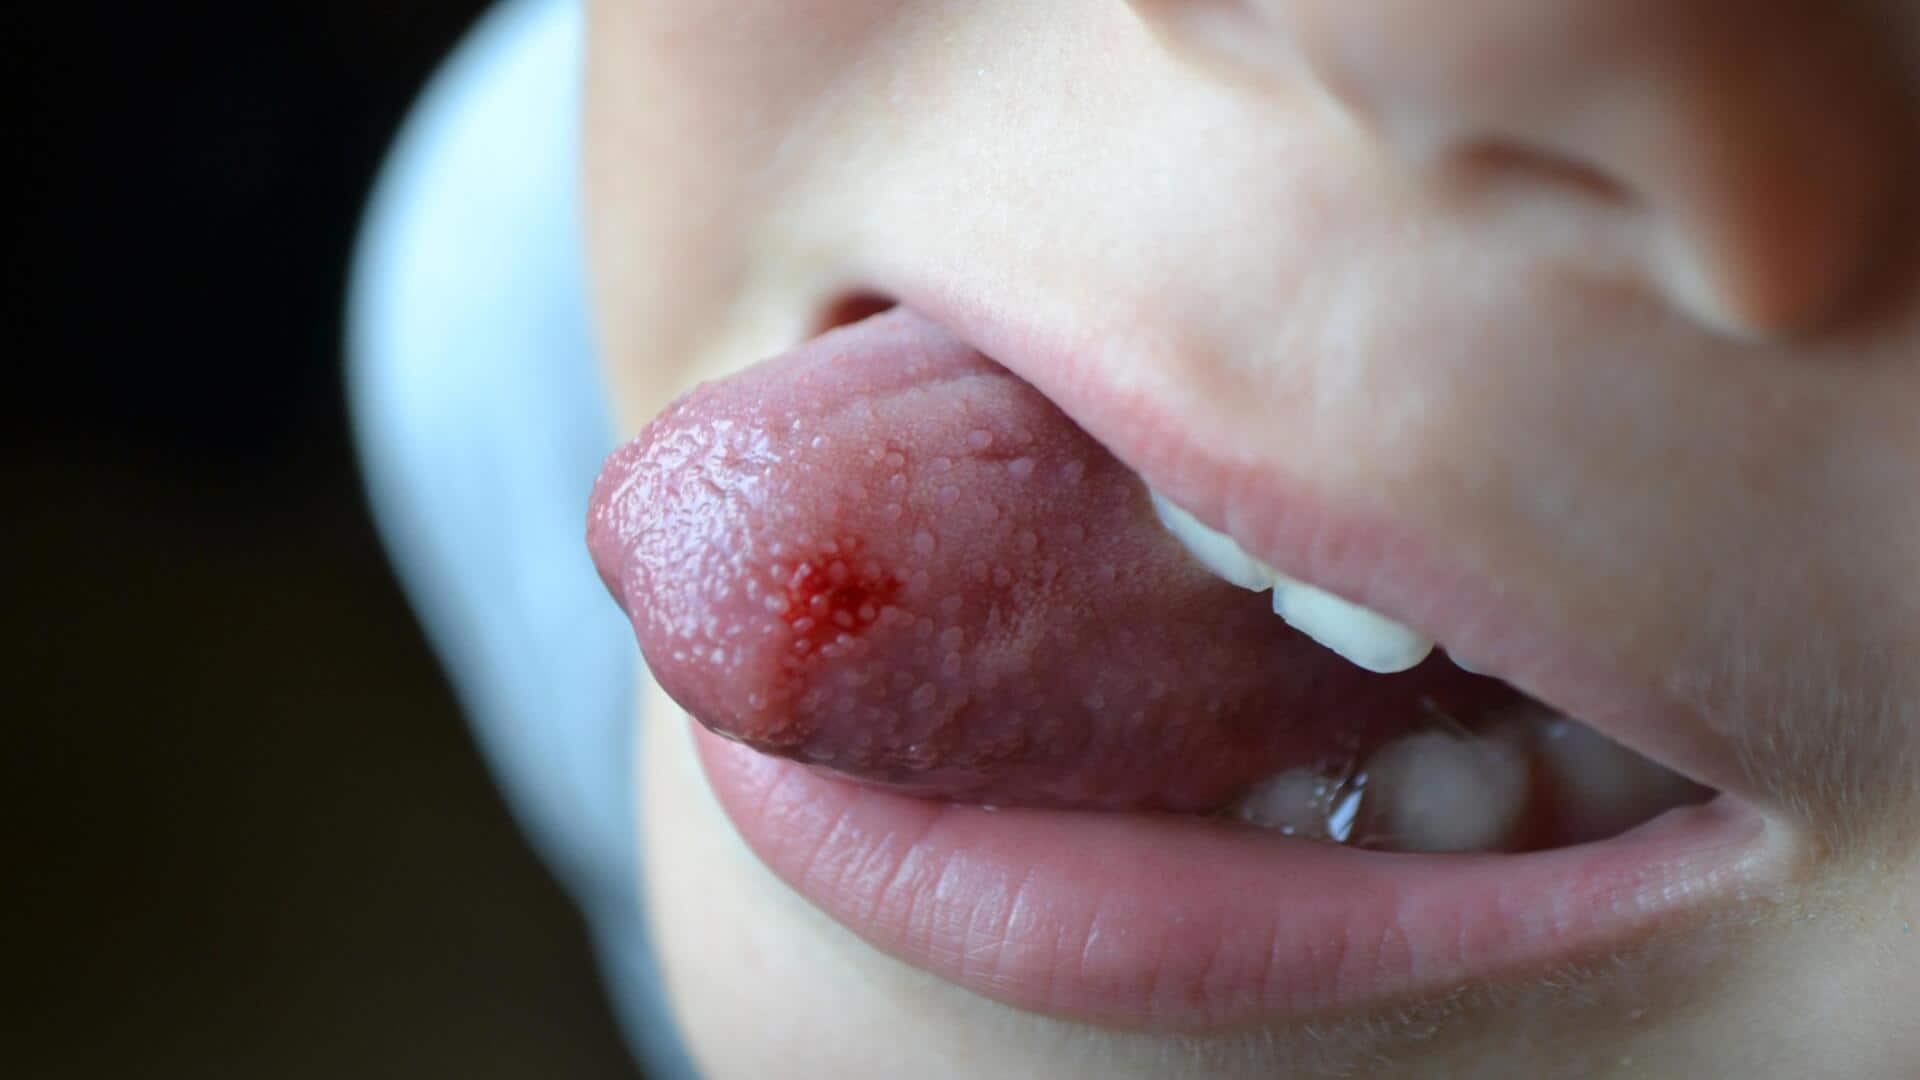 Suffering from tongue blisters? Try these home remedies